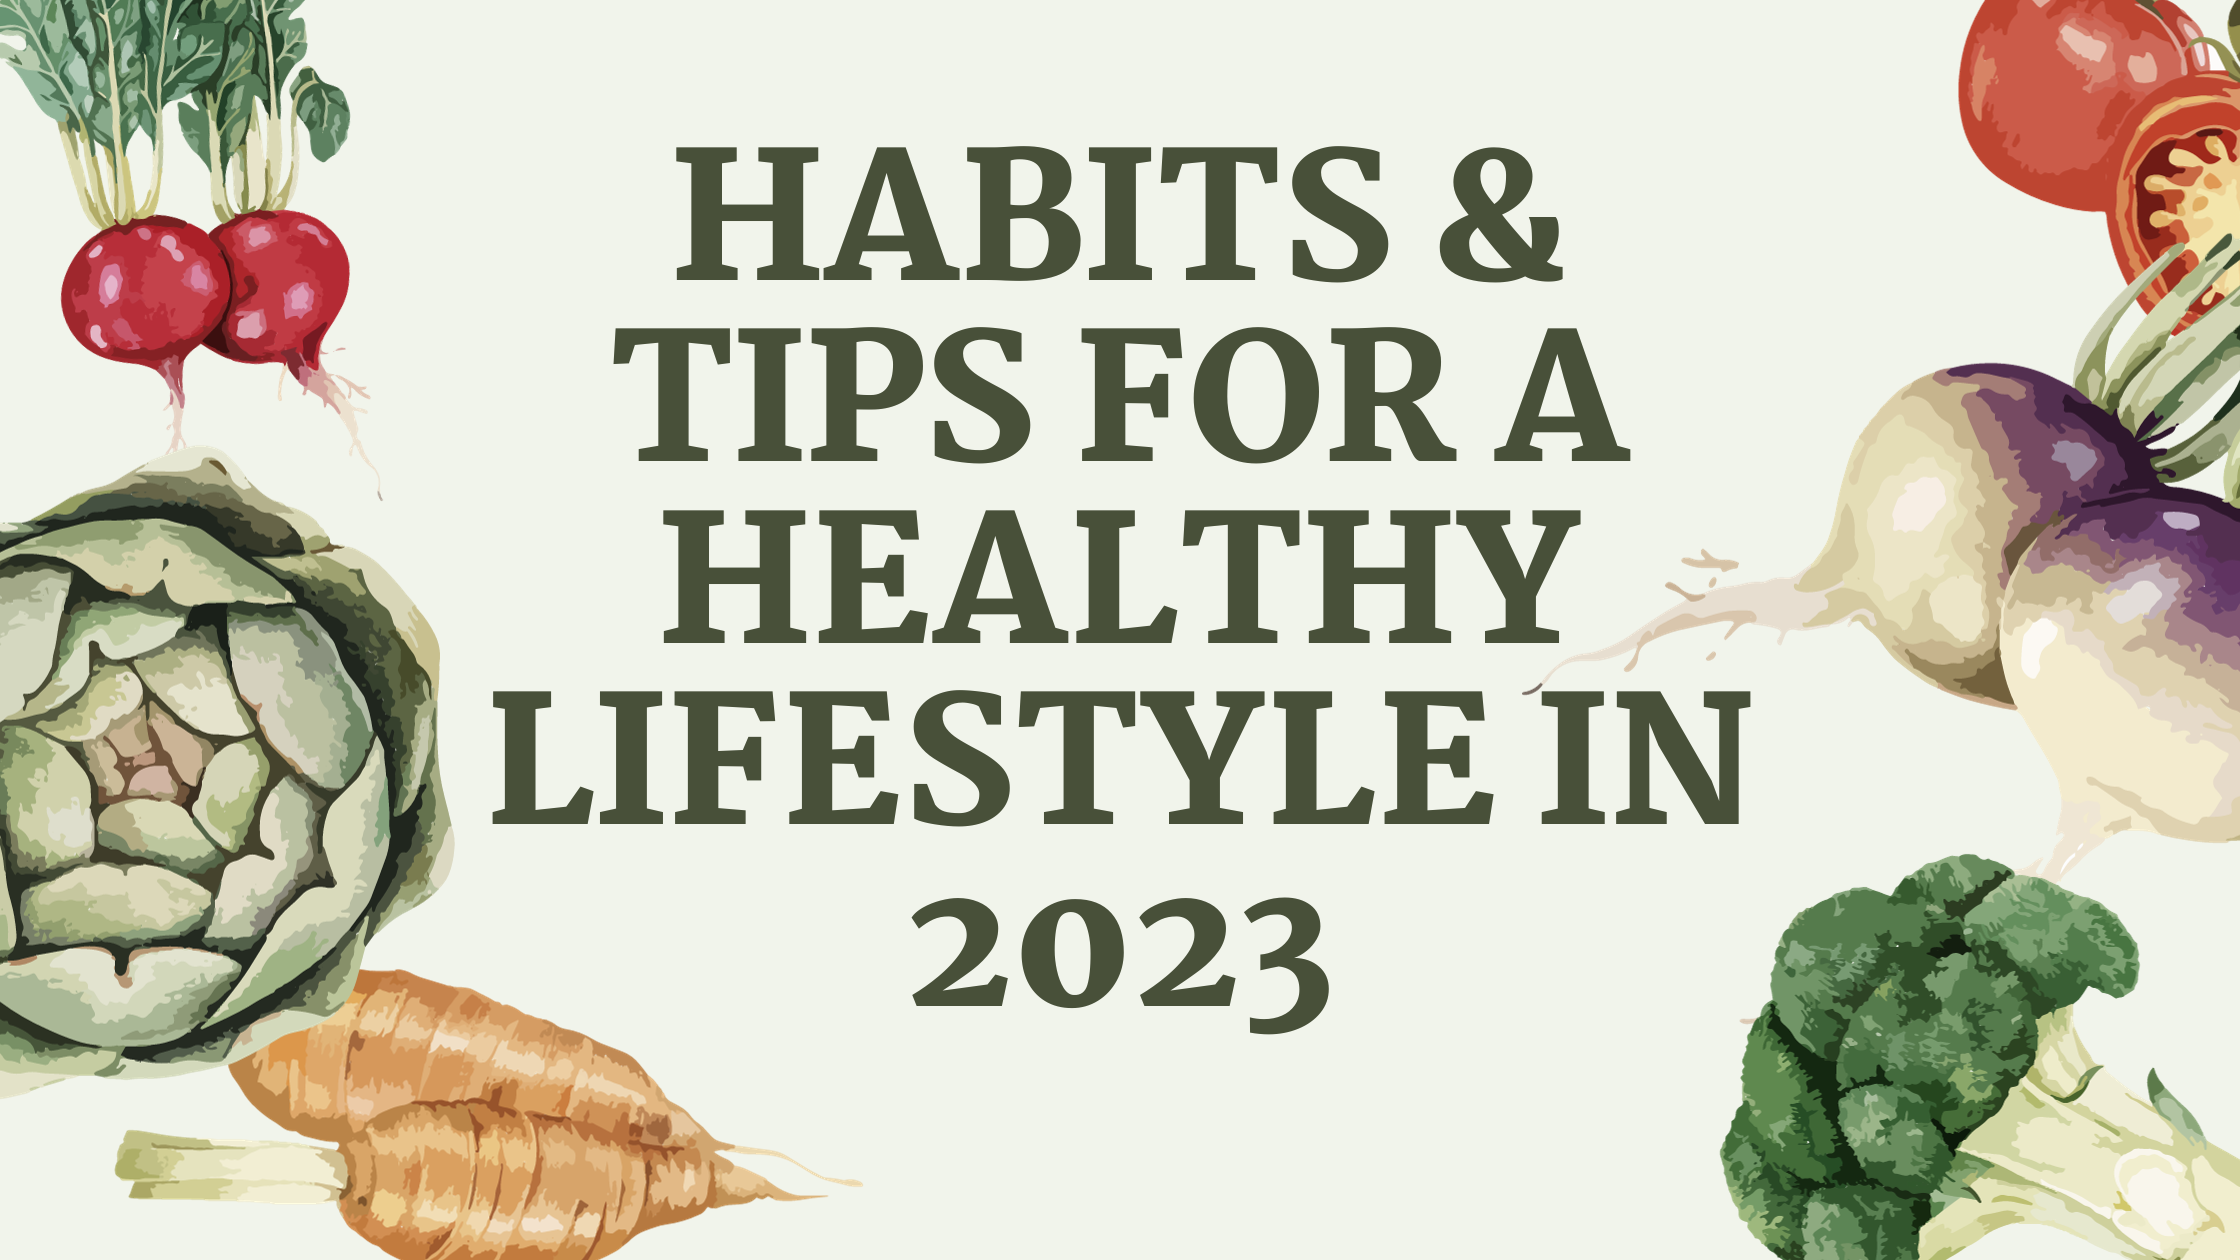 Habits & Tips for a Healthy Lifestyle